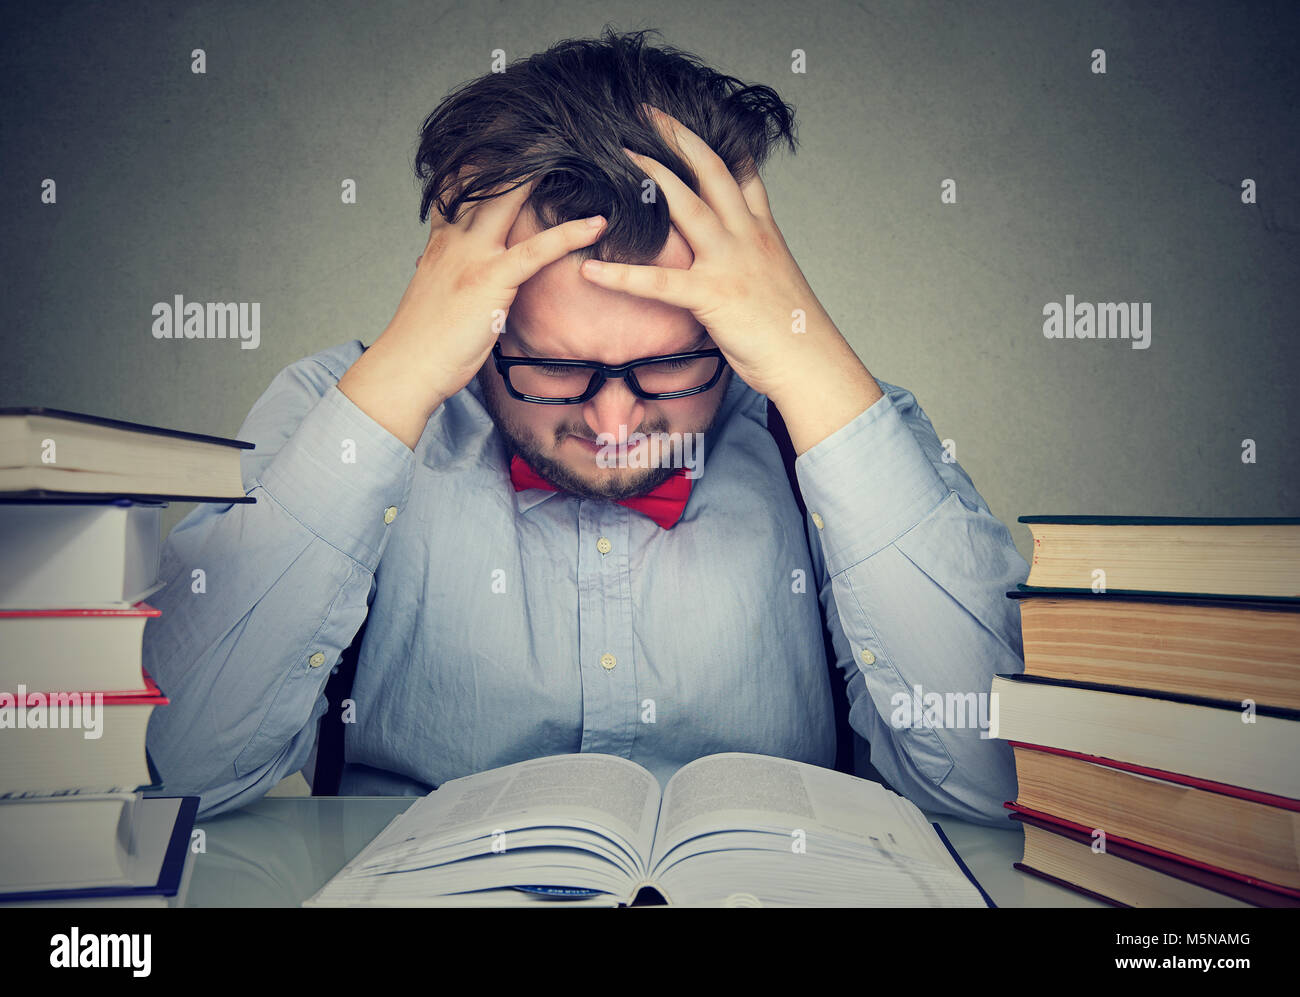 Stressed out student young man with desperate expression looking at his books Stock Photo